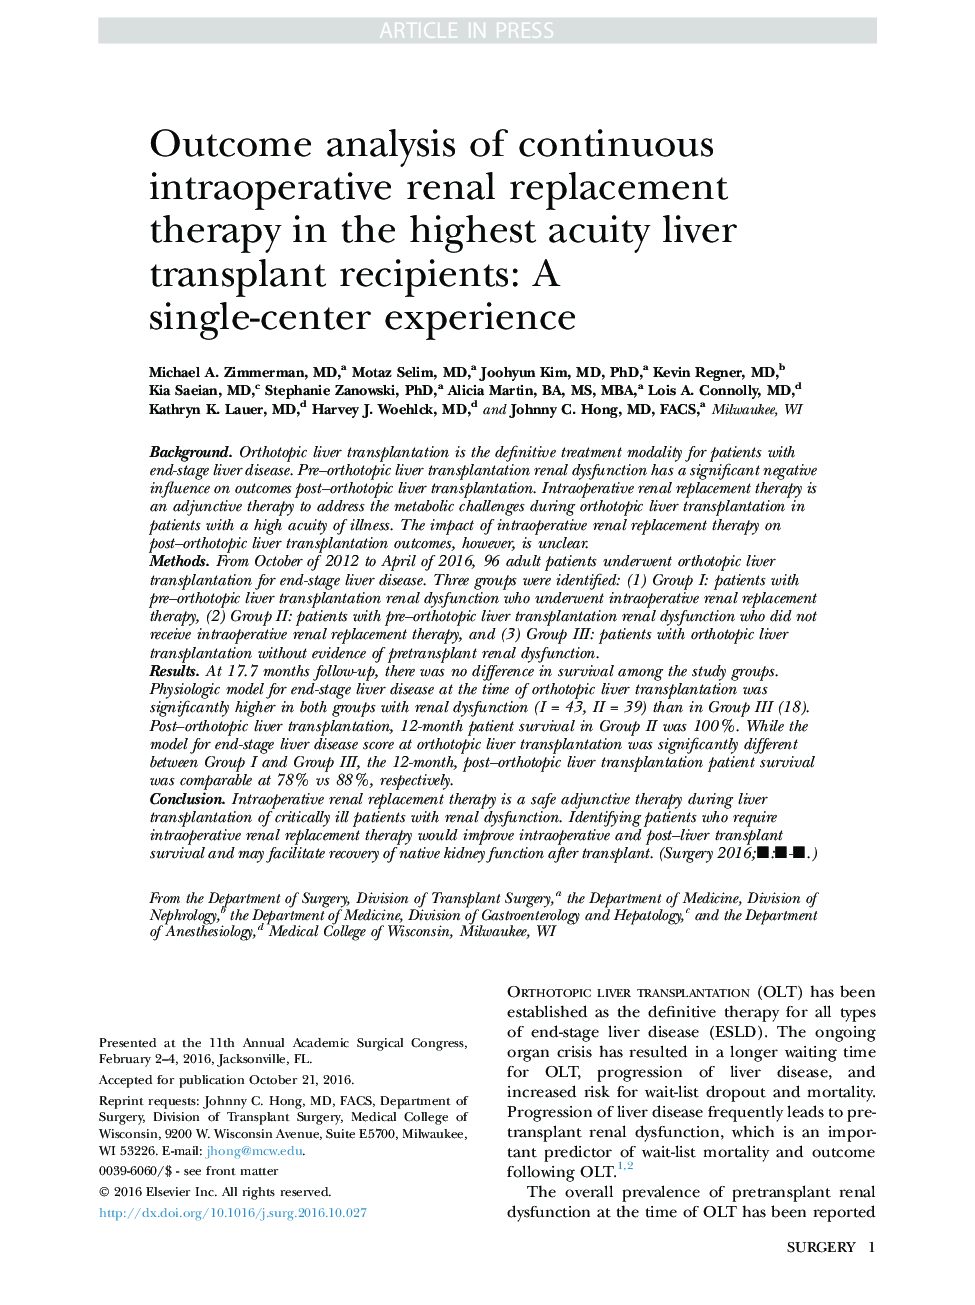 Outcome analysis of continuous intraoperative renal replacement therapy in the highest acuity liver transplant recipients: A single-center experience